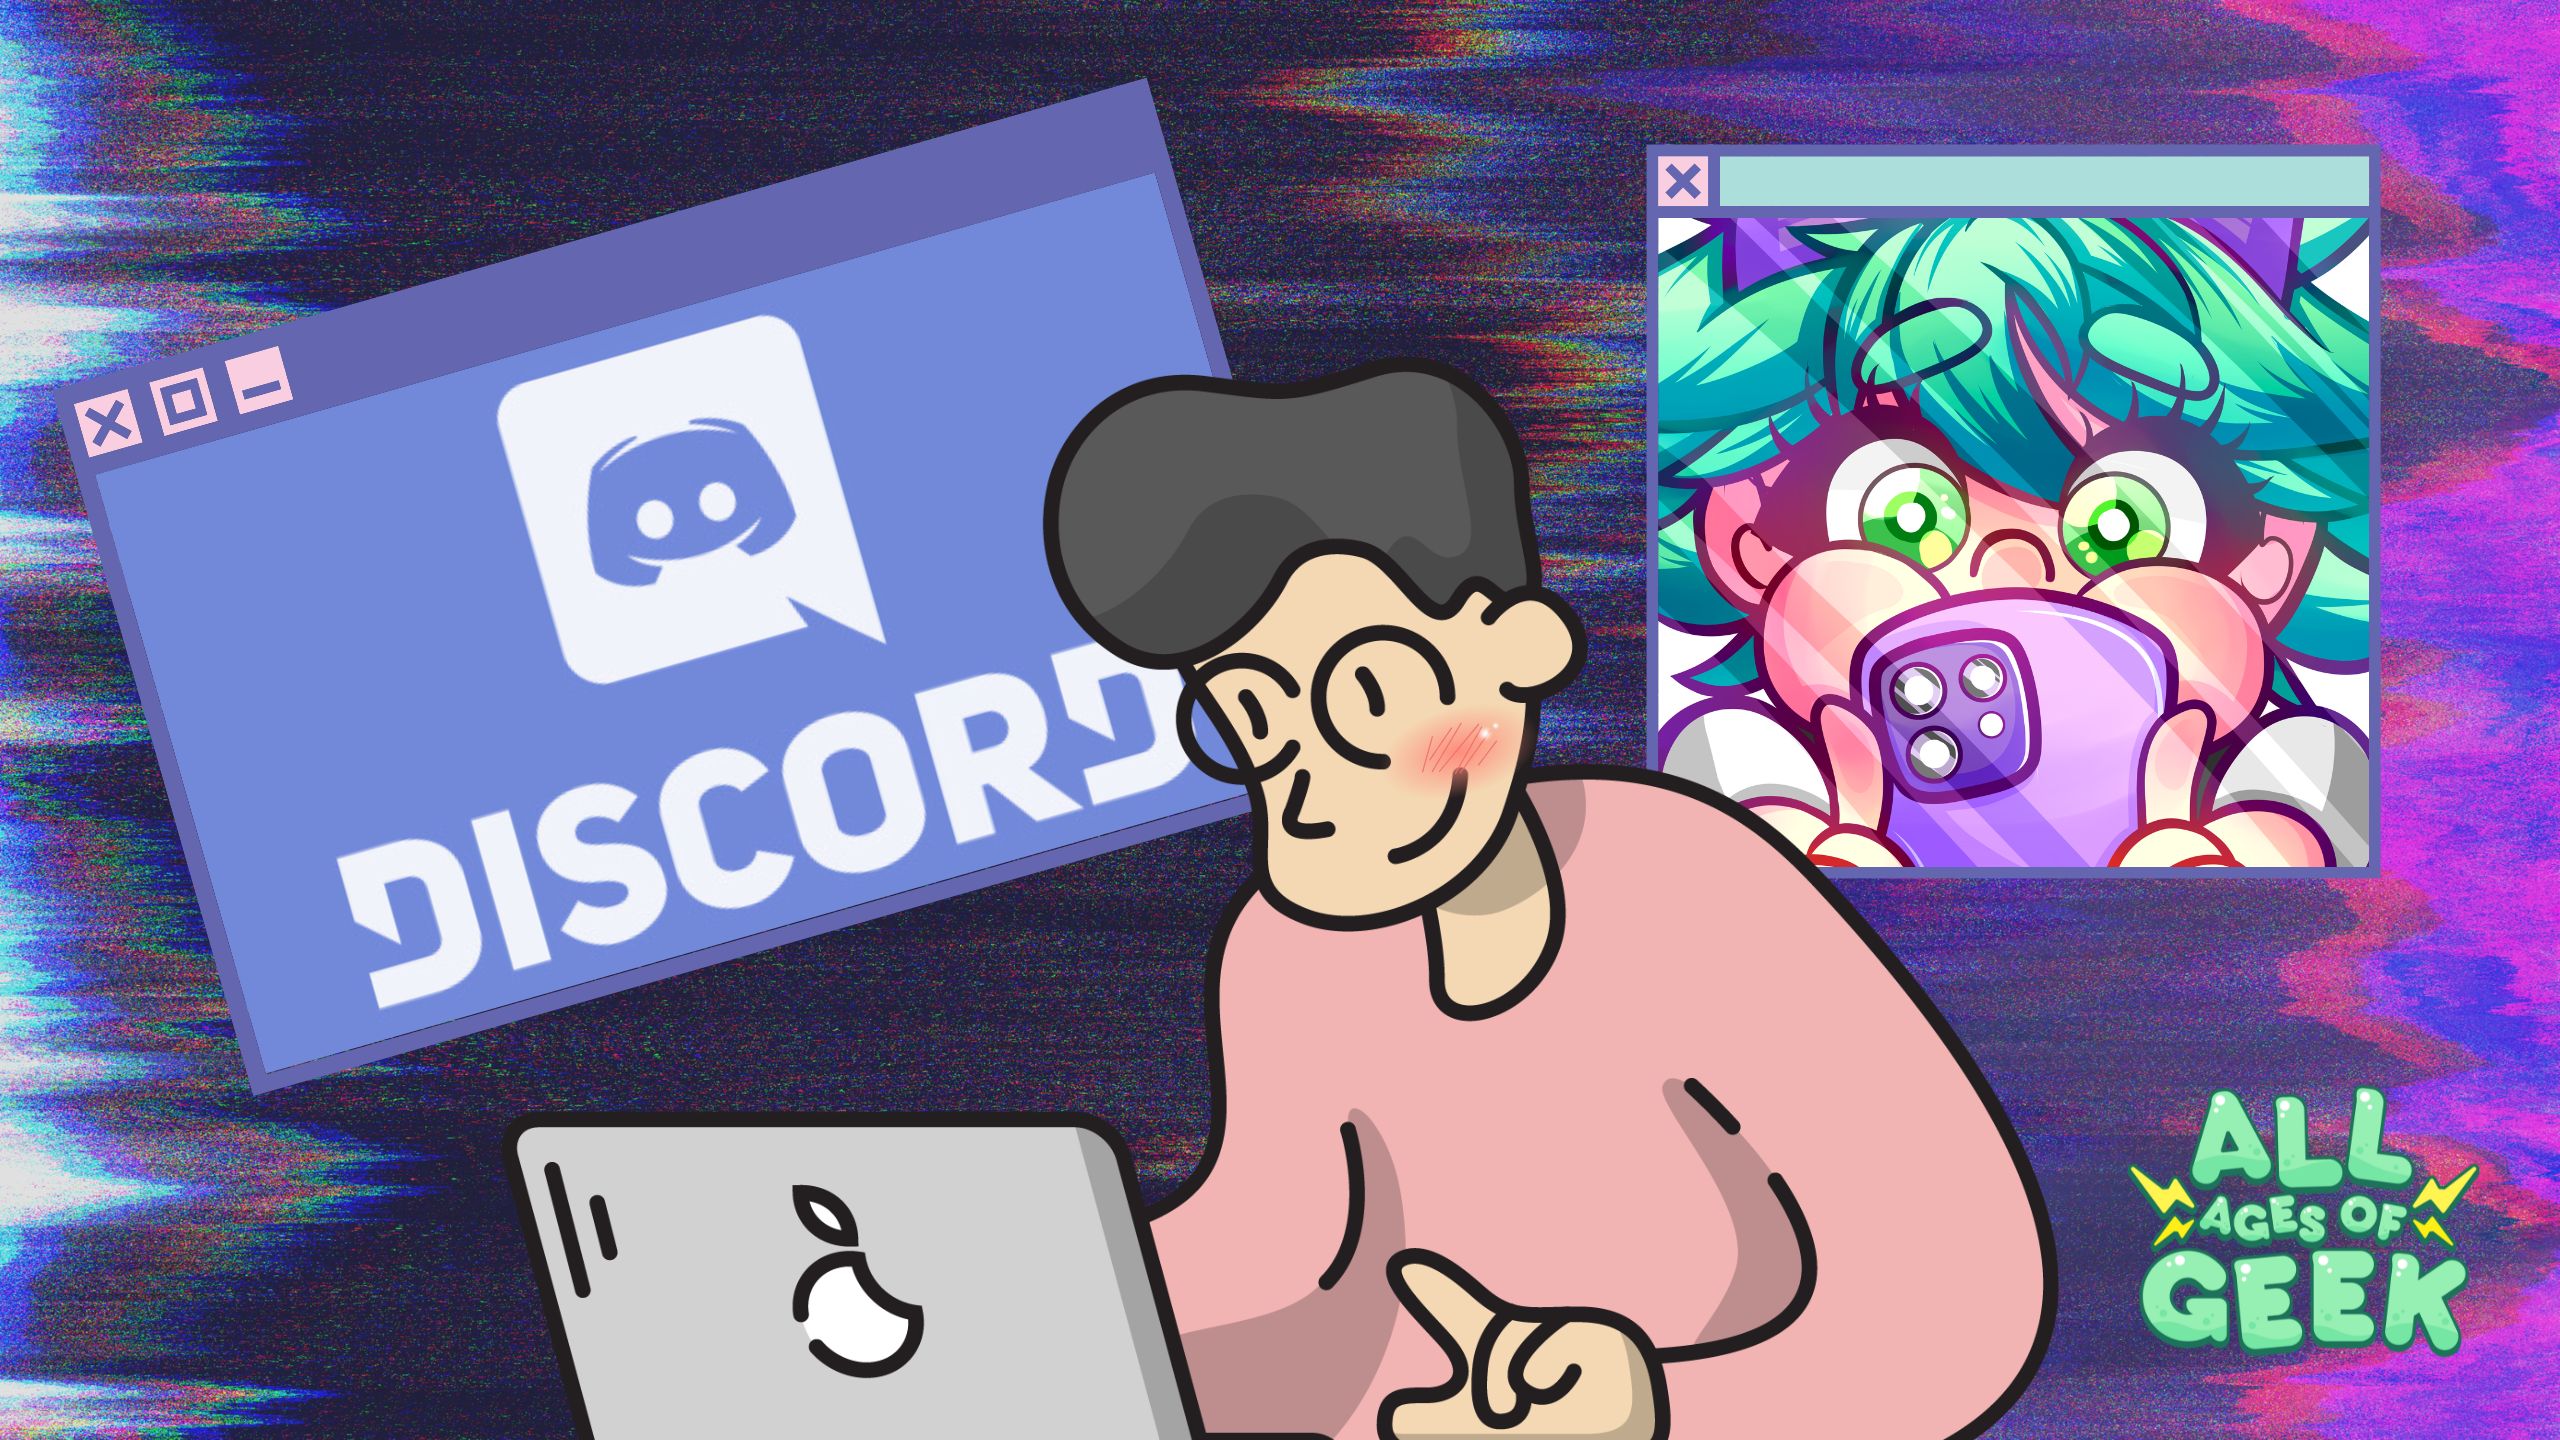 A person using a laptop, with a Discord logo in the background and a colorful anime-style character on another screen. The All Ages of Geek logo is visible in the corner.